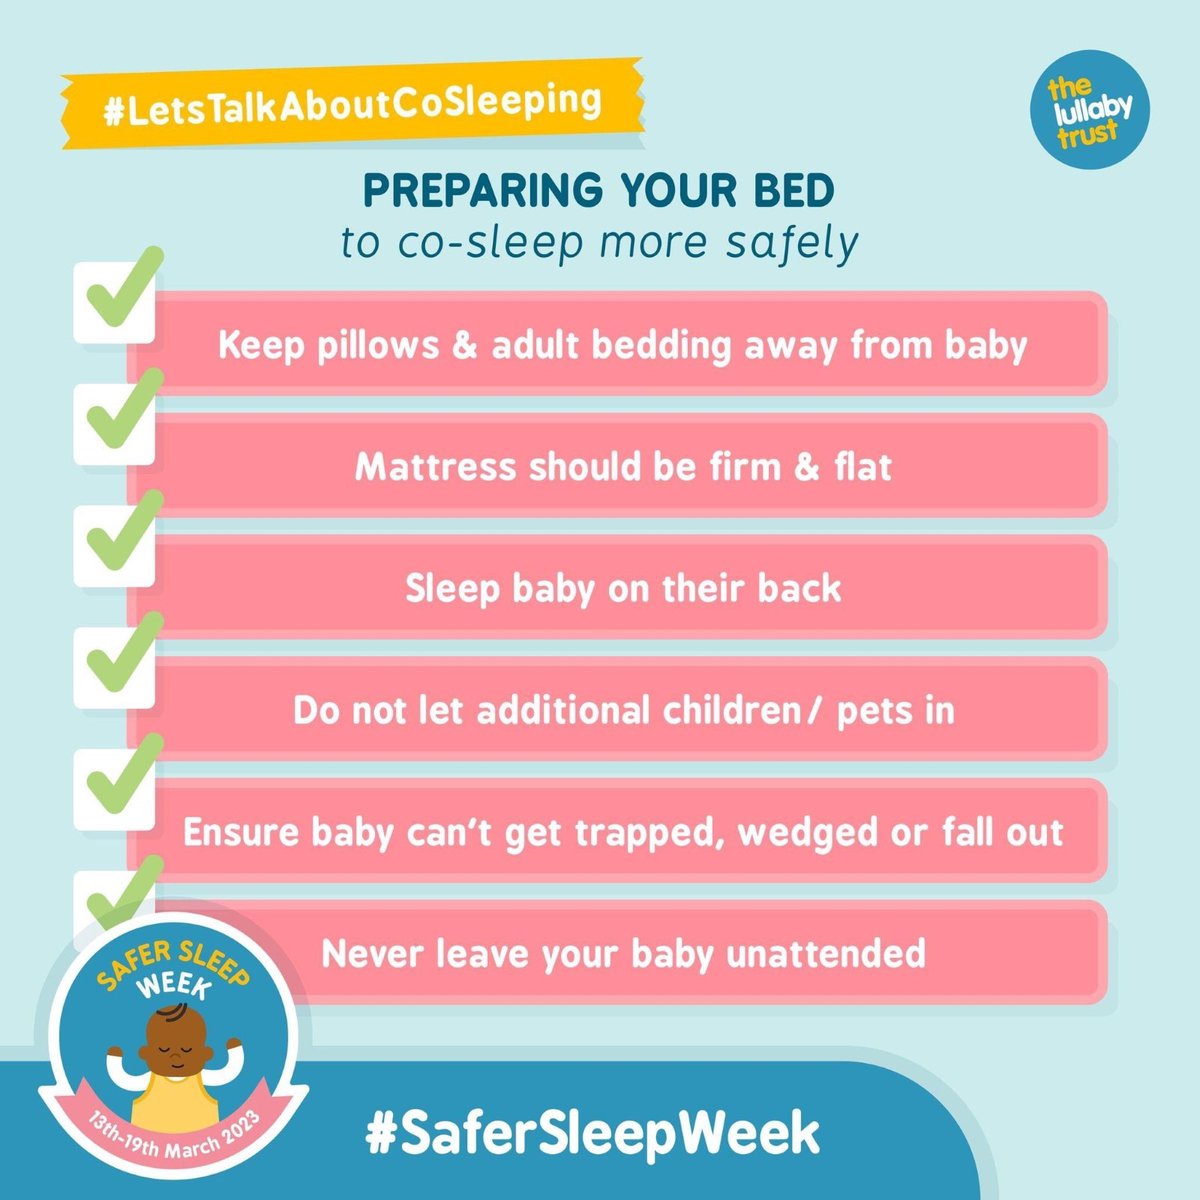 9 out of 10 parents surveyed co-sleep with their baby at least some of the time. Find out how you can prepare your bed for safer intentional or accidental co-sleeping. ➡️ nhs.uk/start-for-life… #SaferSleepWeek